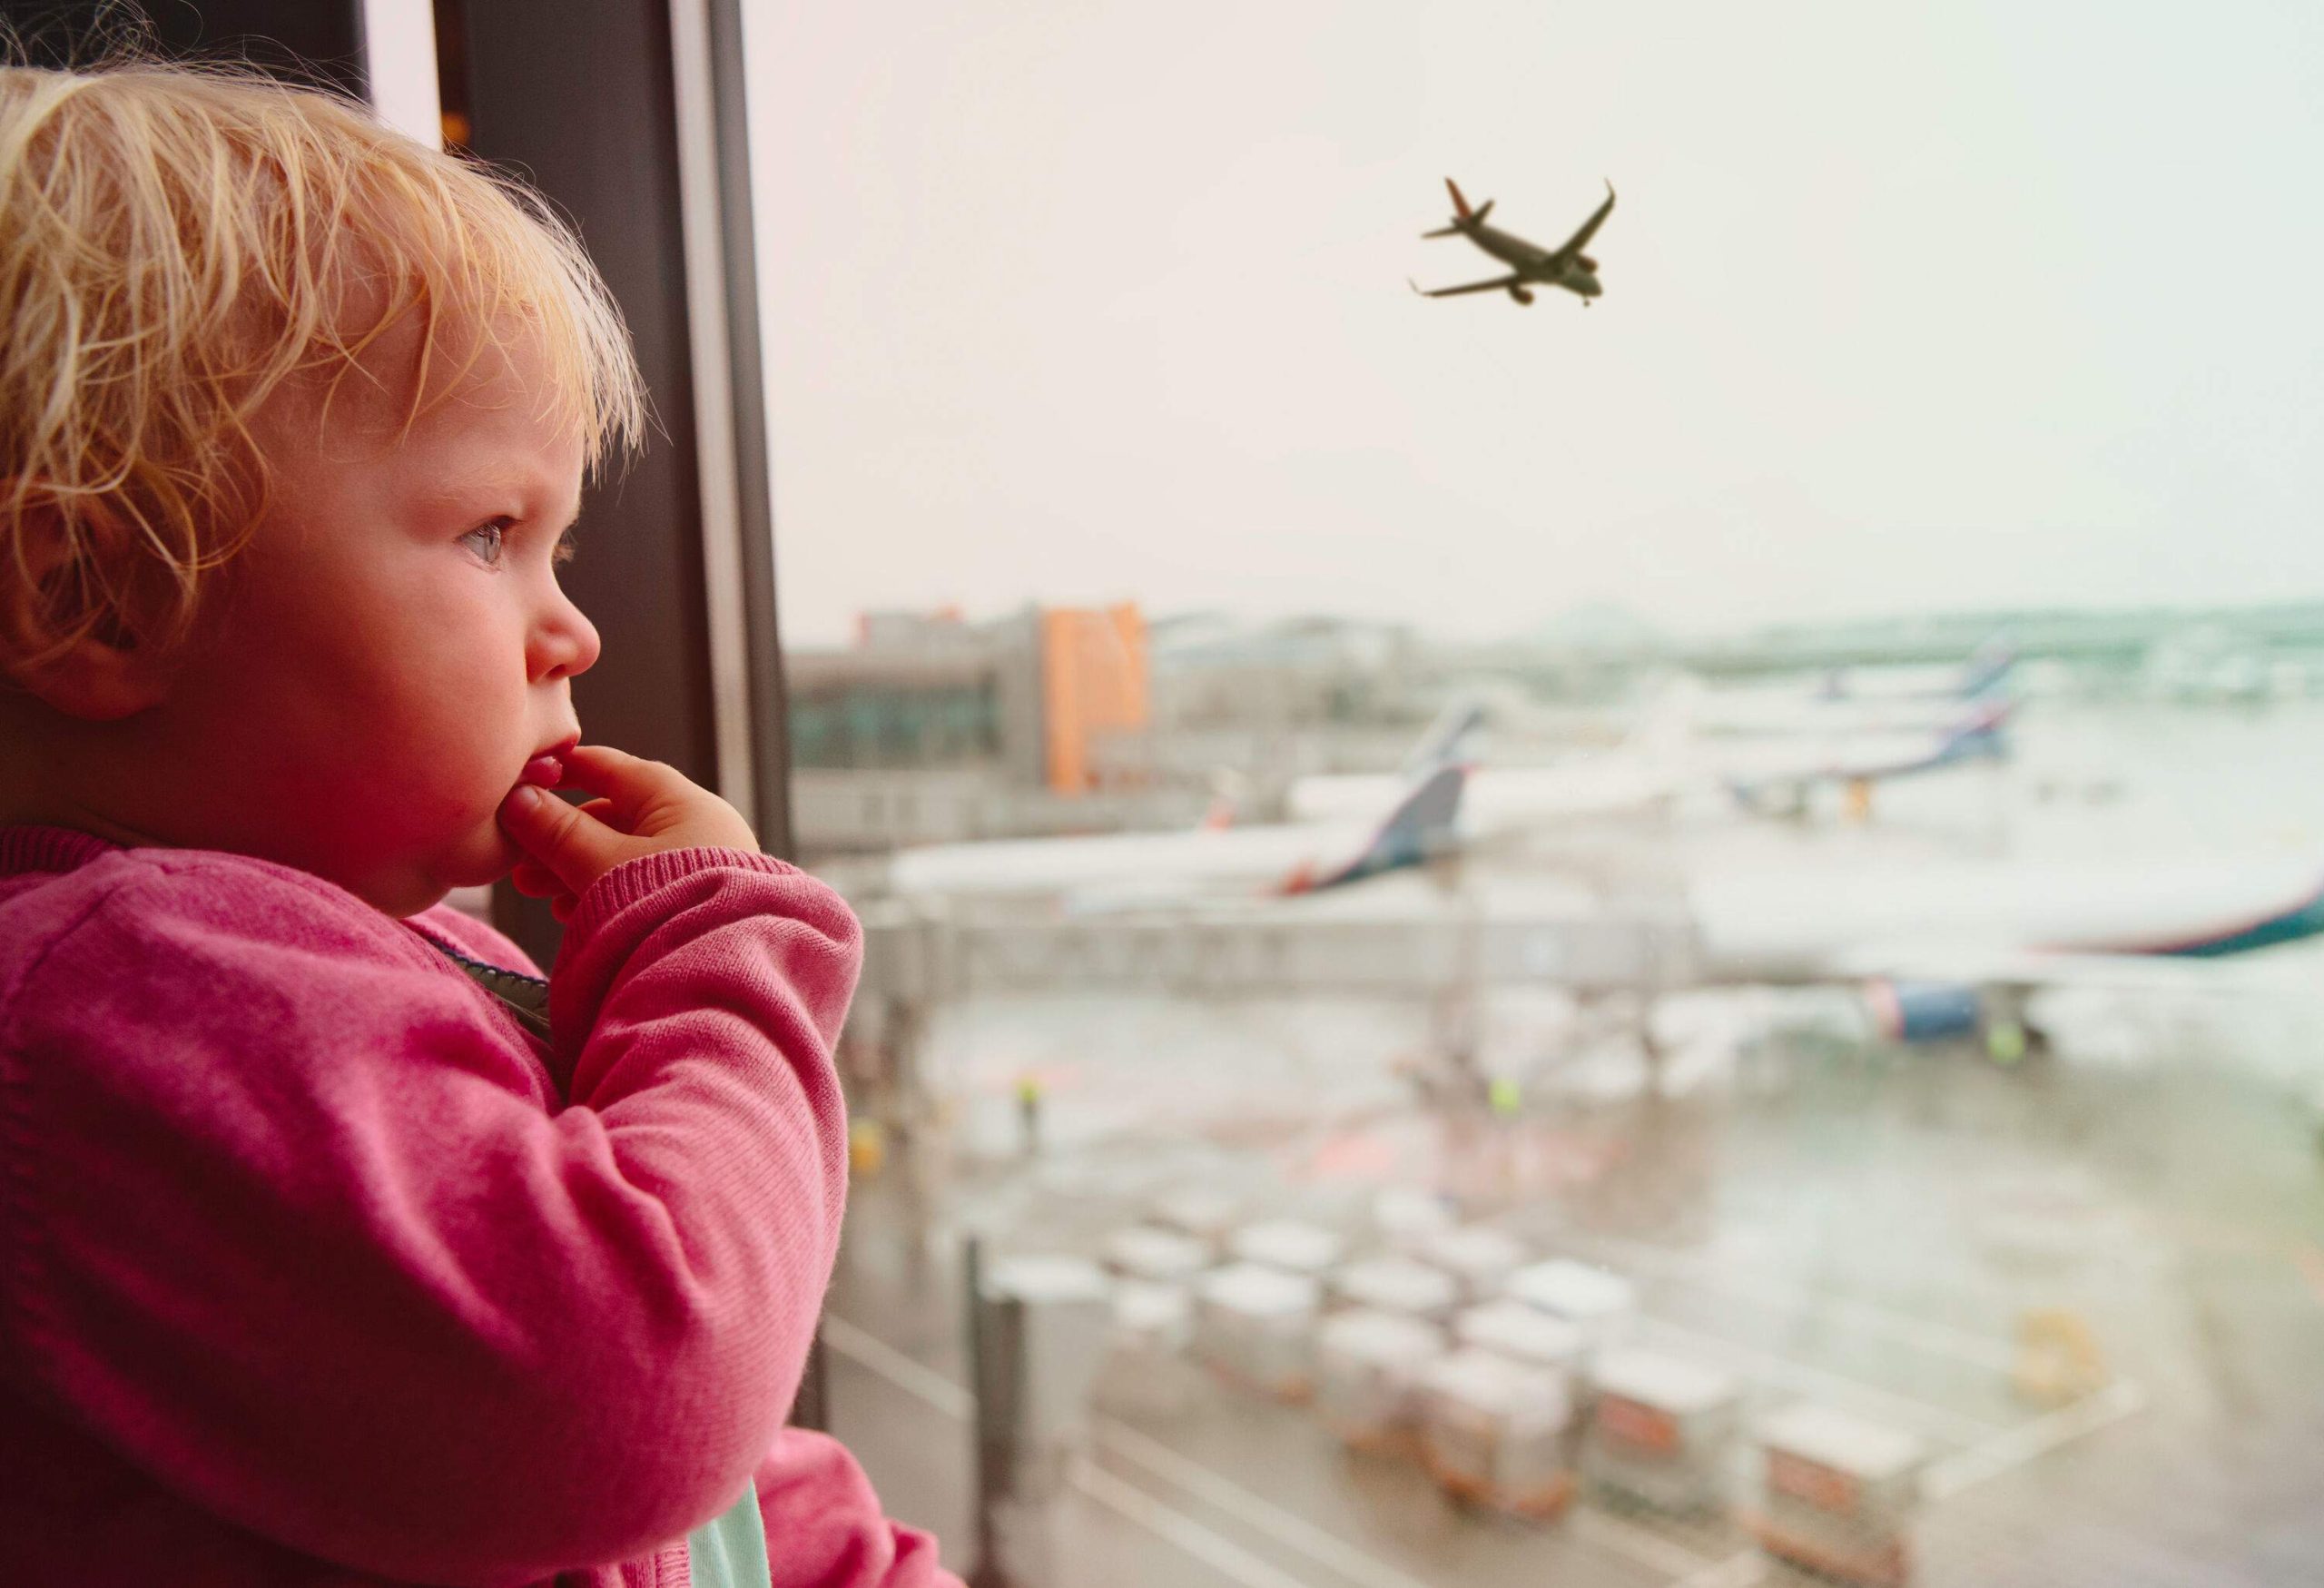 A baby wearing a pink sweater peers out of a window as a plane flies overhead.